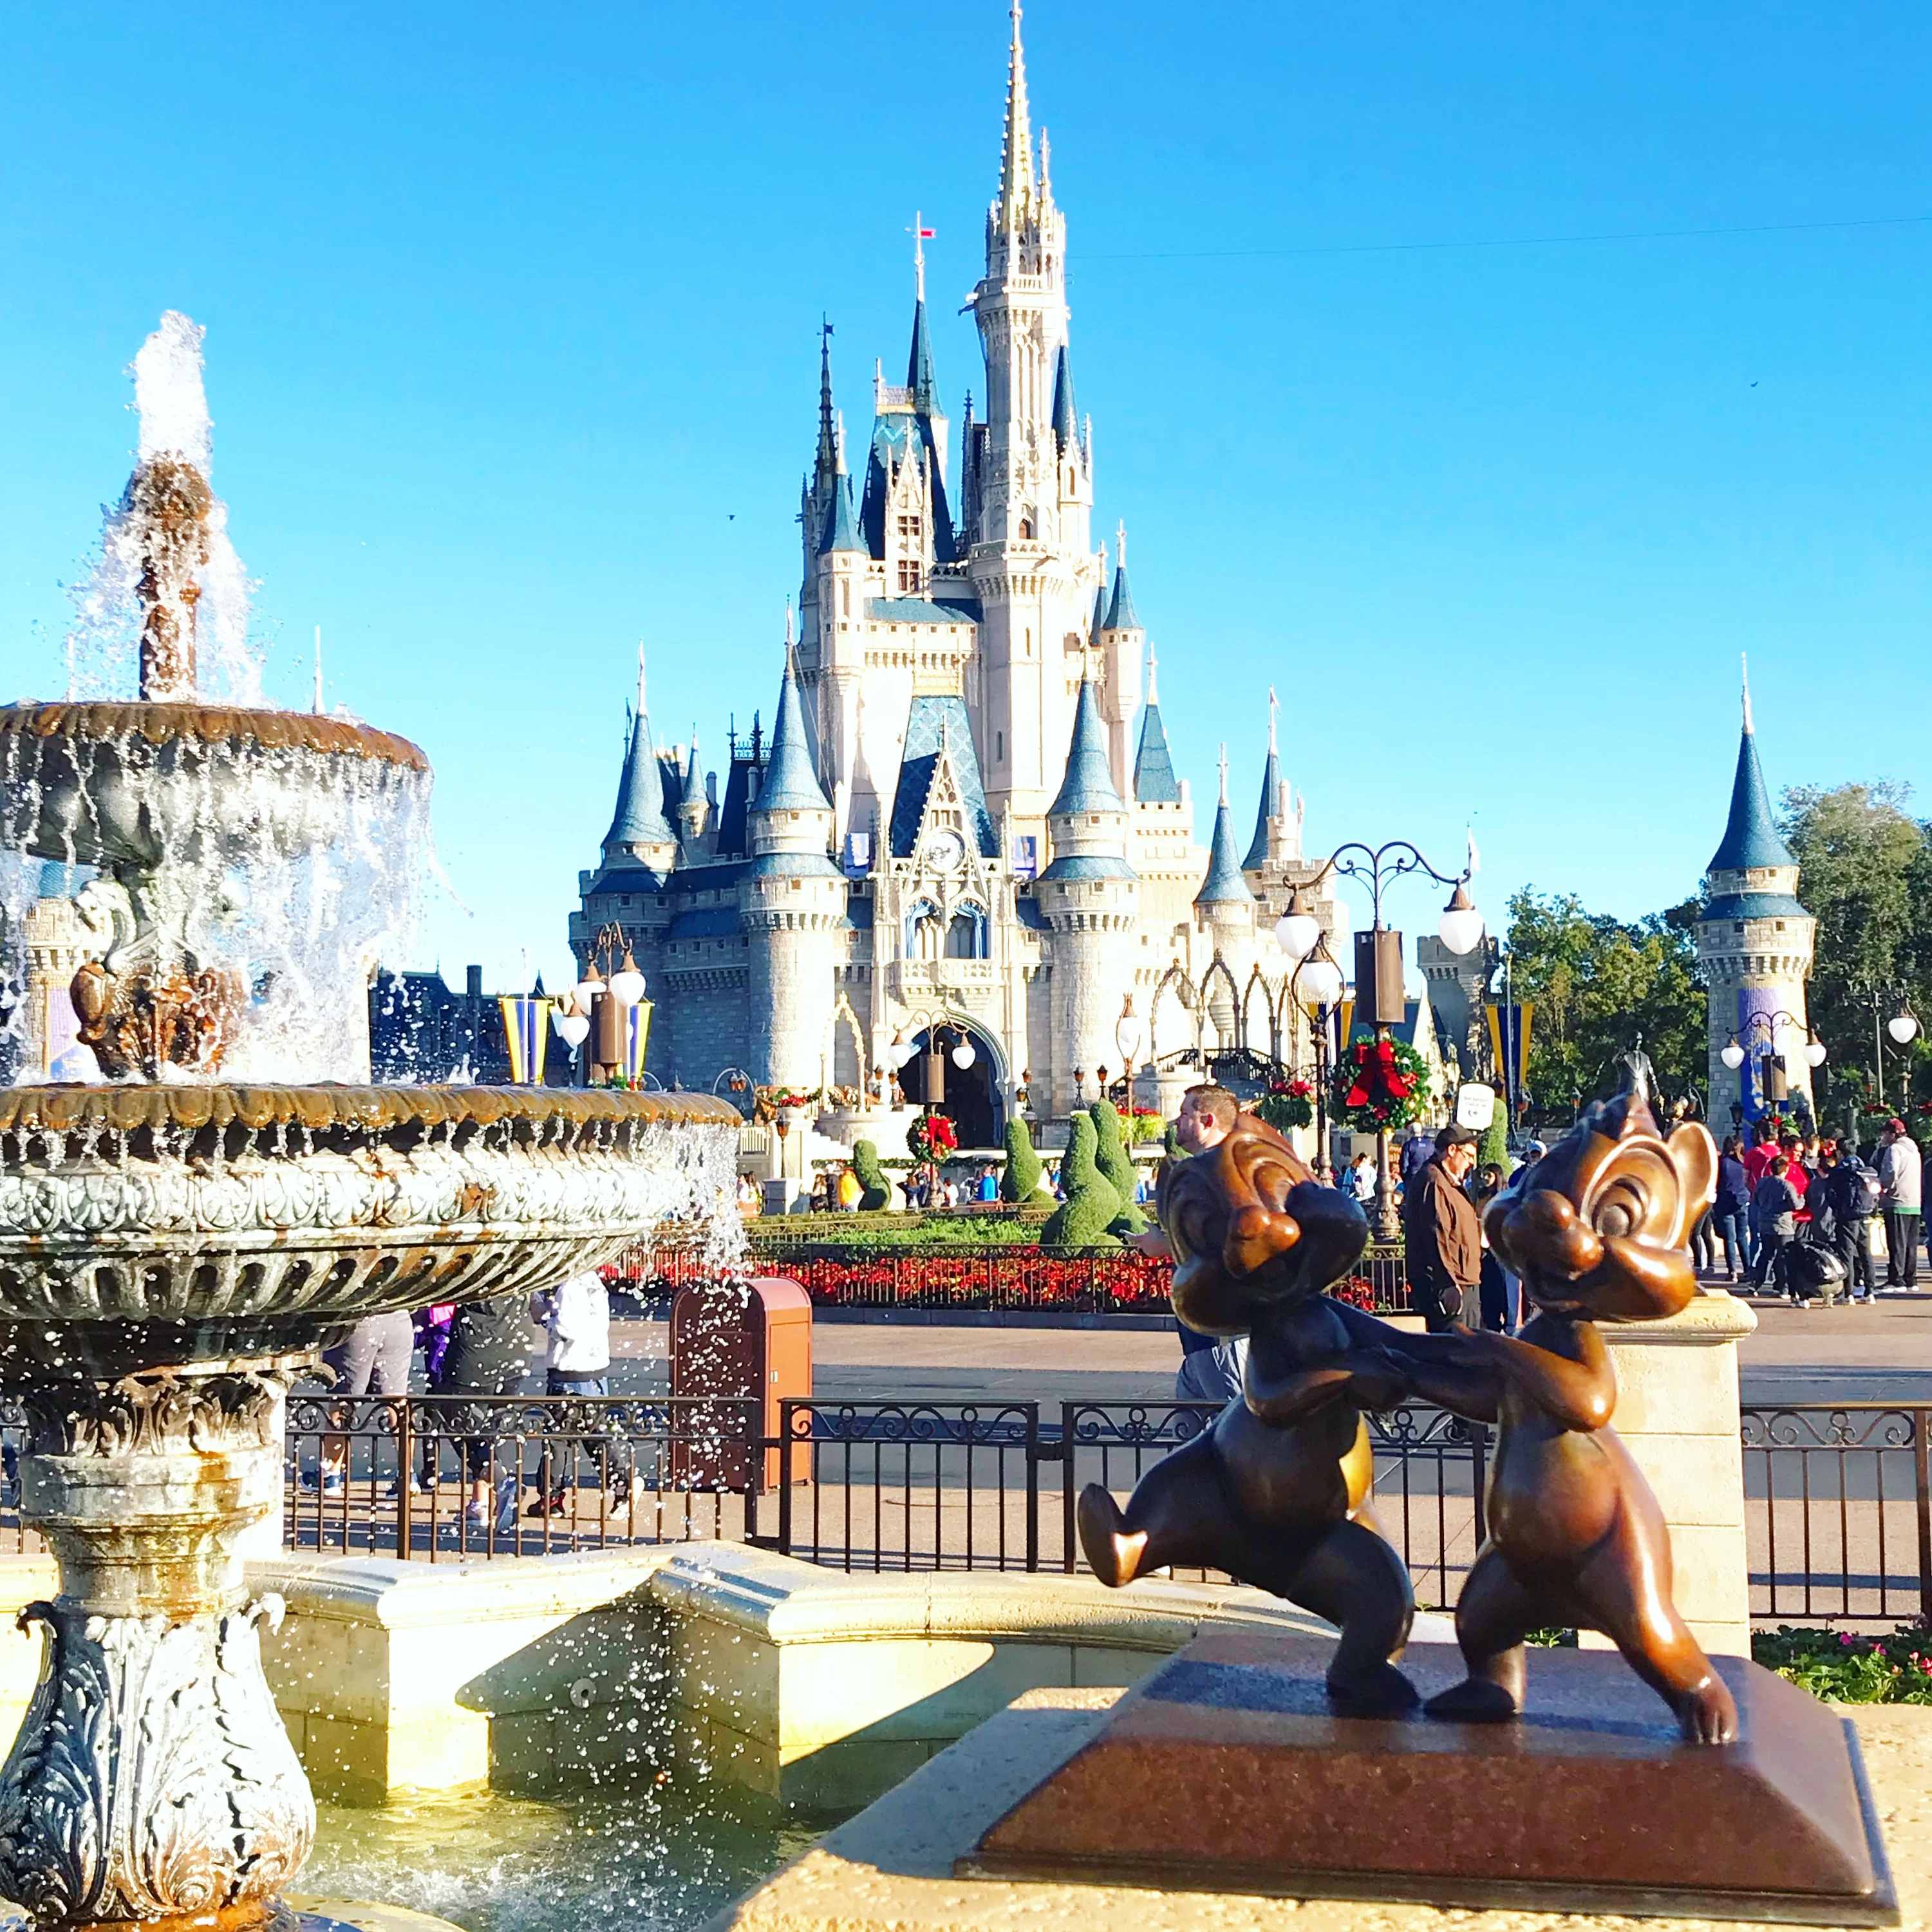 chil and dale statue next to fountain with cinderella's castle in the background